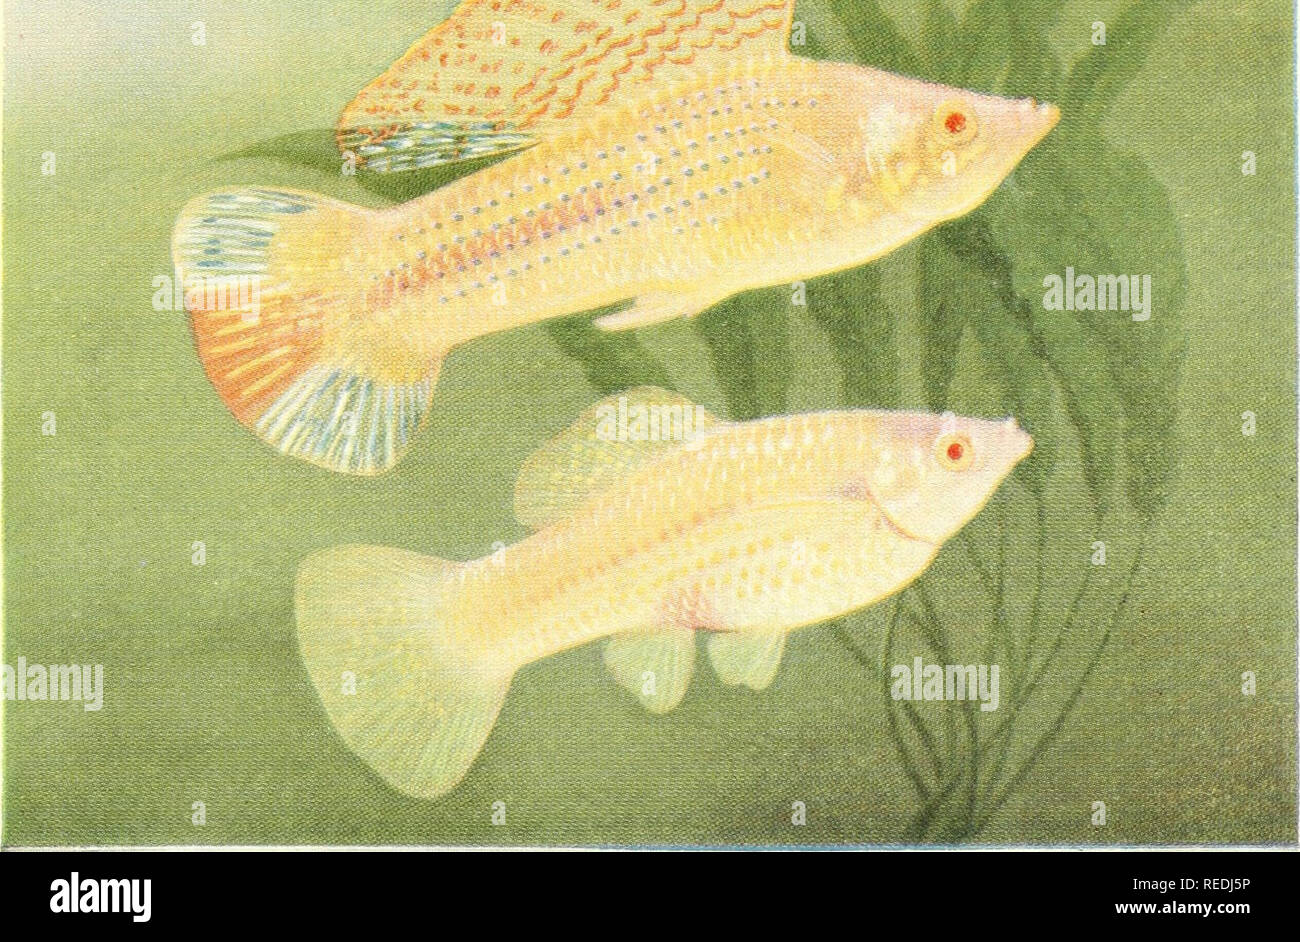 . The complete aquarium book; the care and breeding of goldfish and tropical fishes. Aquariums; Goldfish. Fig. 235a. Mollienisia latipinna Golden Blond Variety One of the comparatively new introductions into the aquarium, the Golden Blond Mollienisia soon established itself favorably among aquarists who are not constitutionally opposed to albinos of all sorts, for it must be said that this fish is a genuine pink-eyed variety. The breed was produced by selective breeding from a single albino specimen which was caught in the wild. The strain is now definitely established, and breeds true to colo Stock Photo